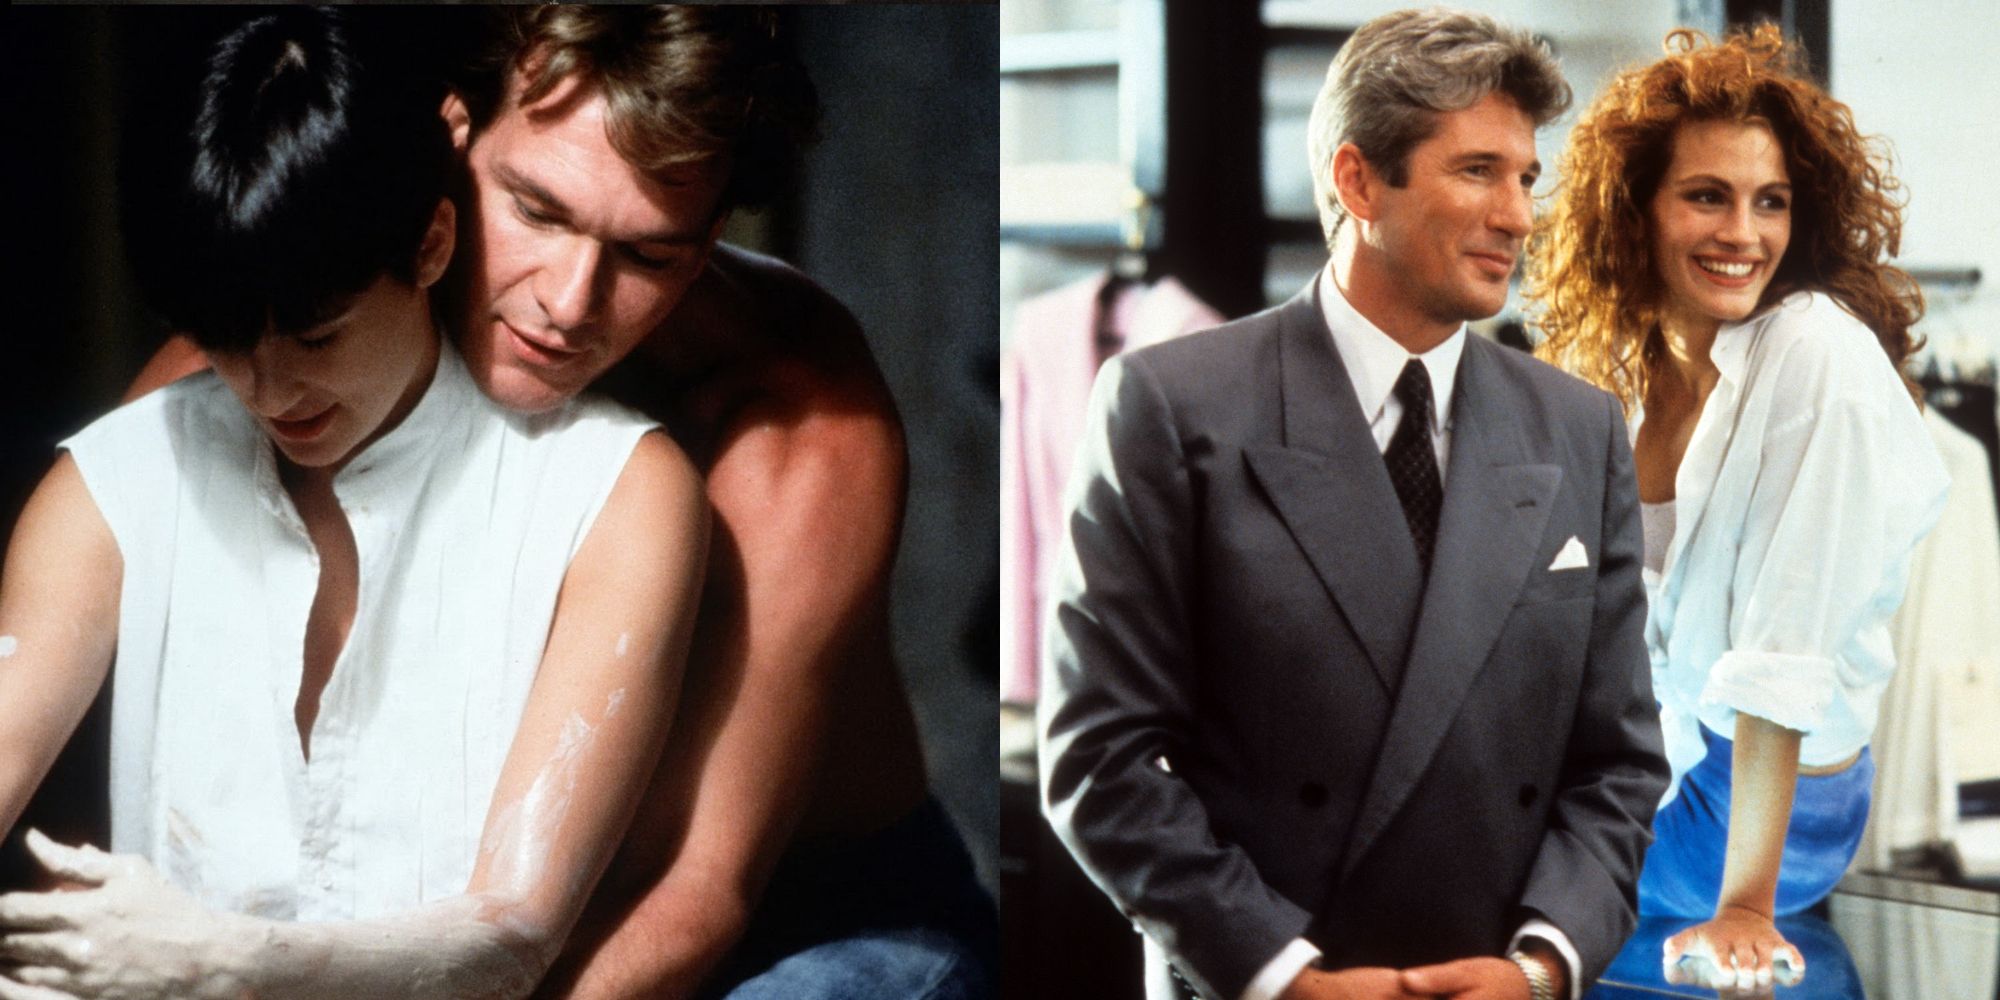 Split image showing the main characters from Ghost and Pretty Woman.